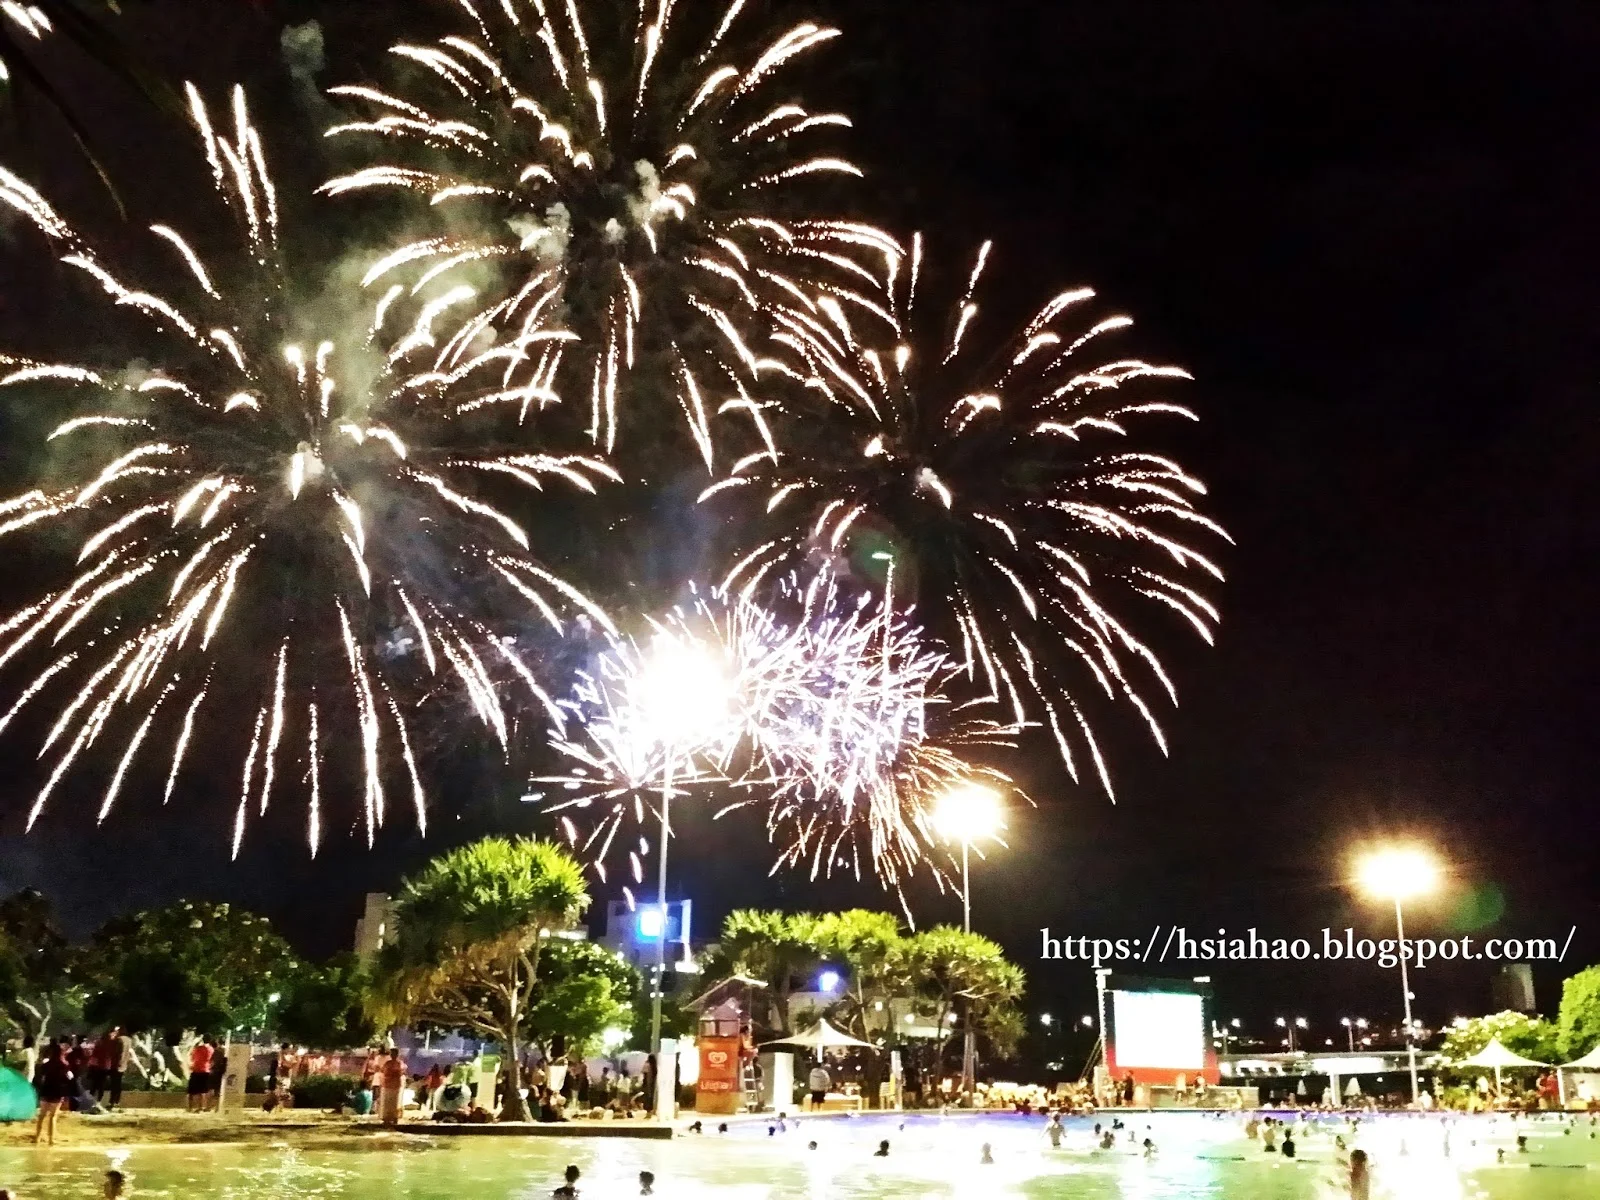 Brisbane-free-fun-things-to-do-Christmas-New-Year-events-activities-fireworks-festival-Australia